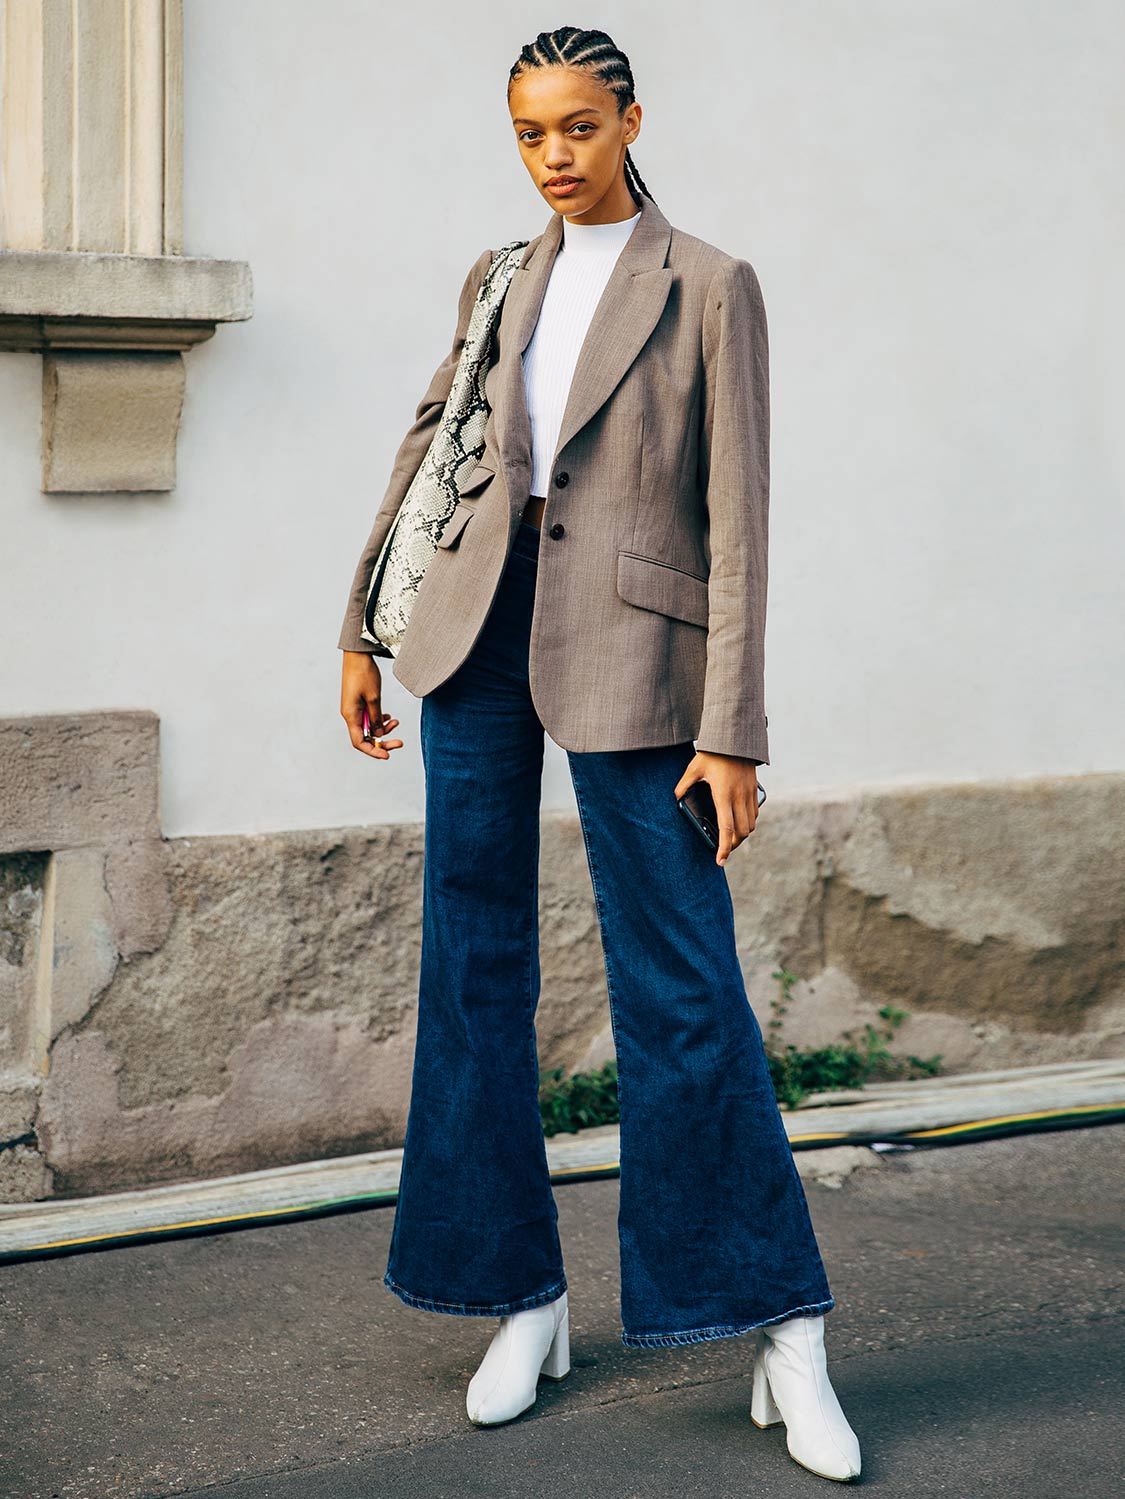 How To Style Your Flared Jeans: Best Street Style Ideas 2022